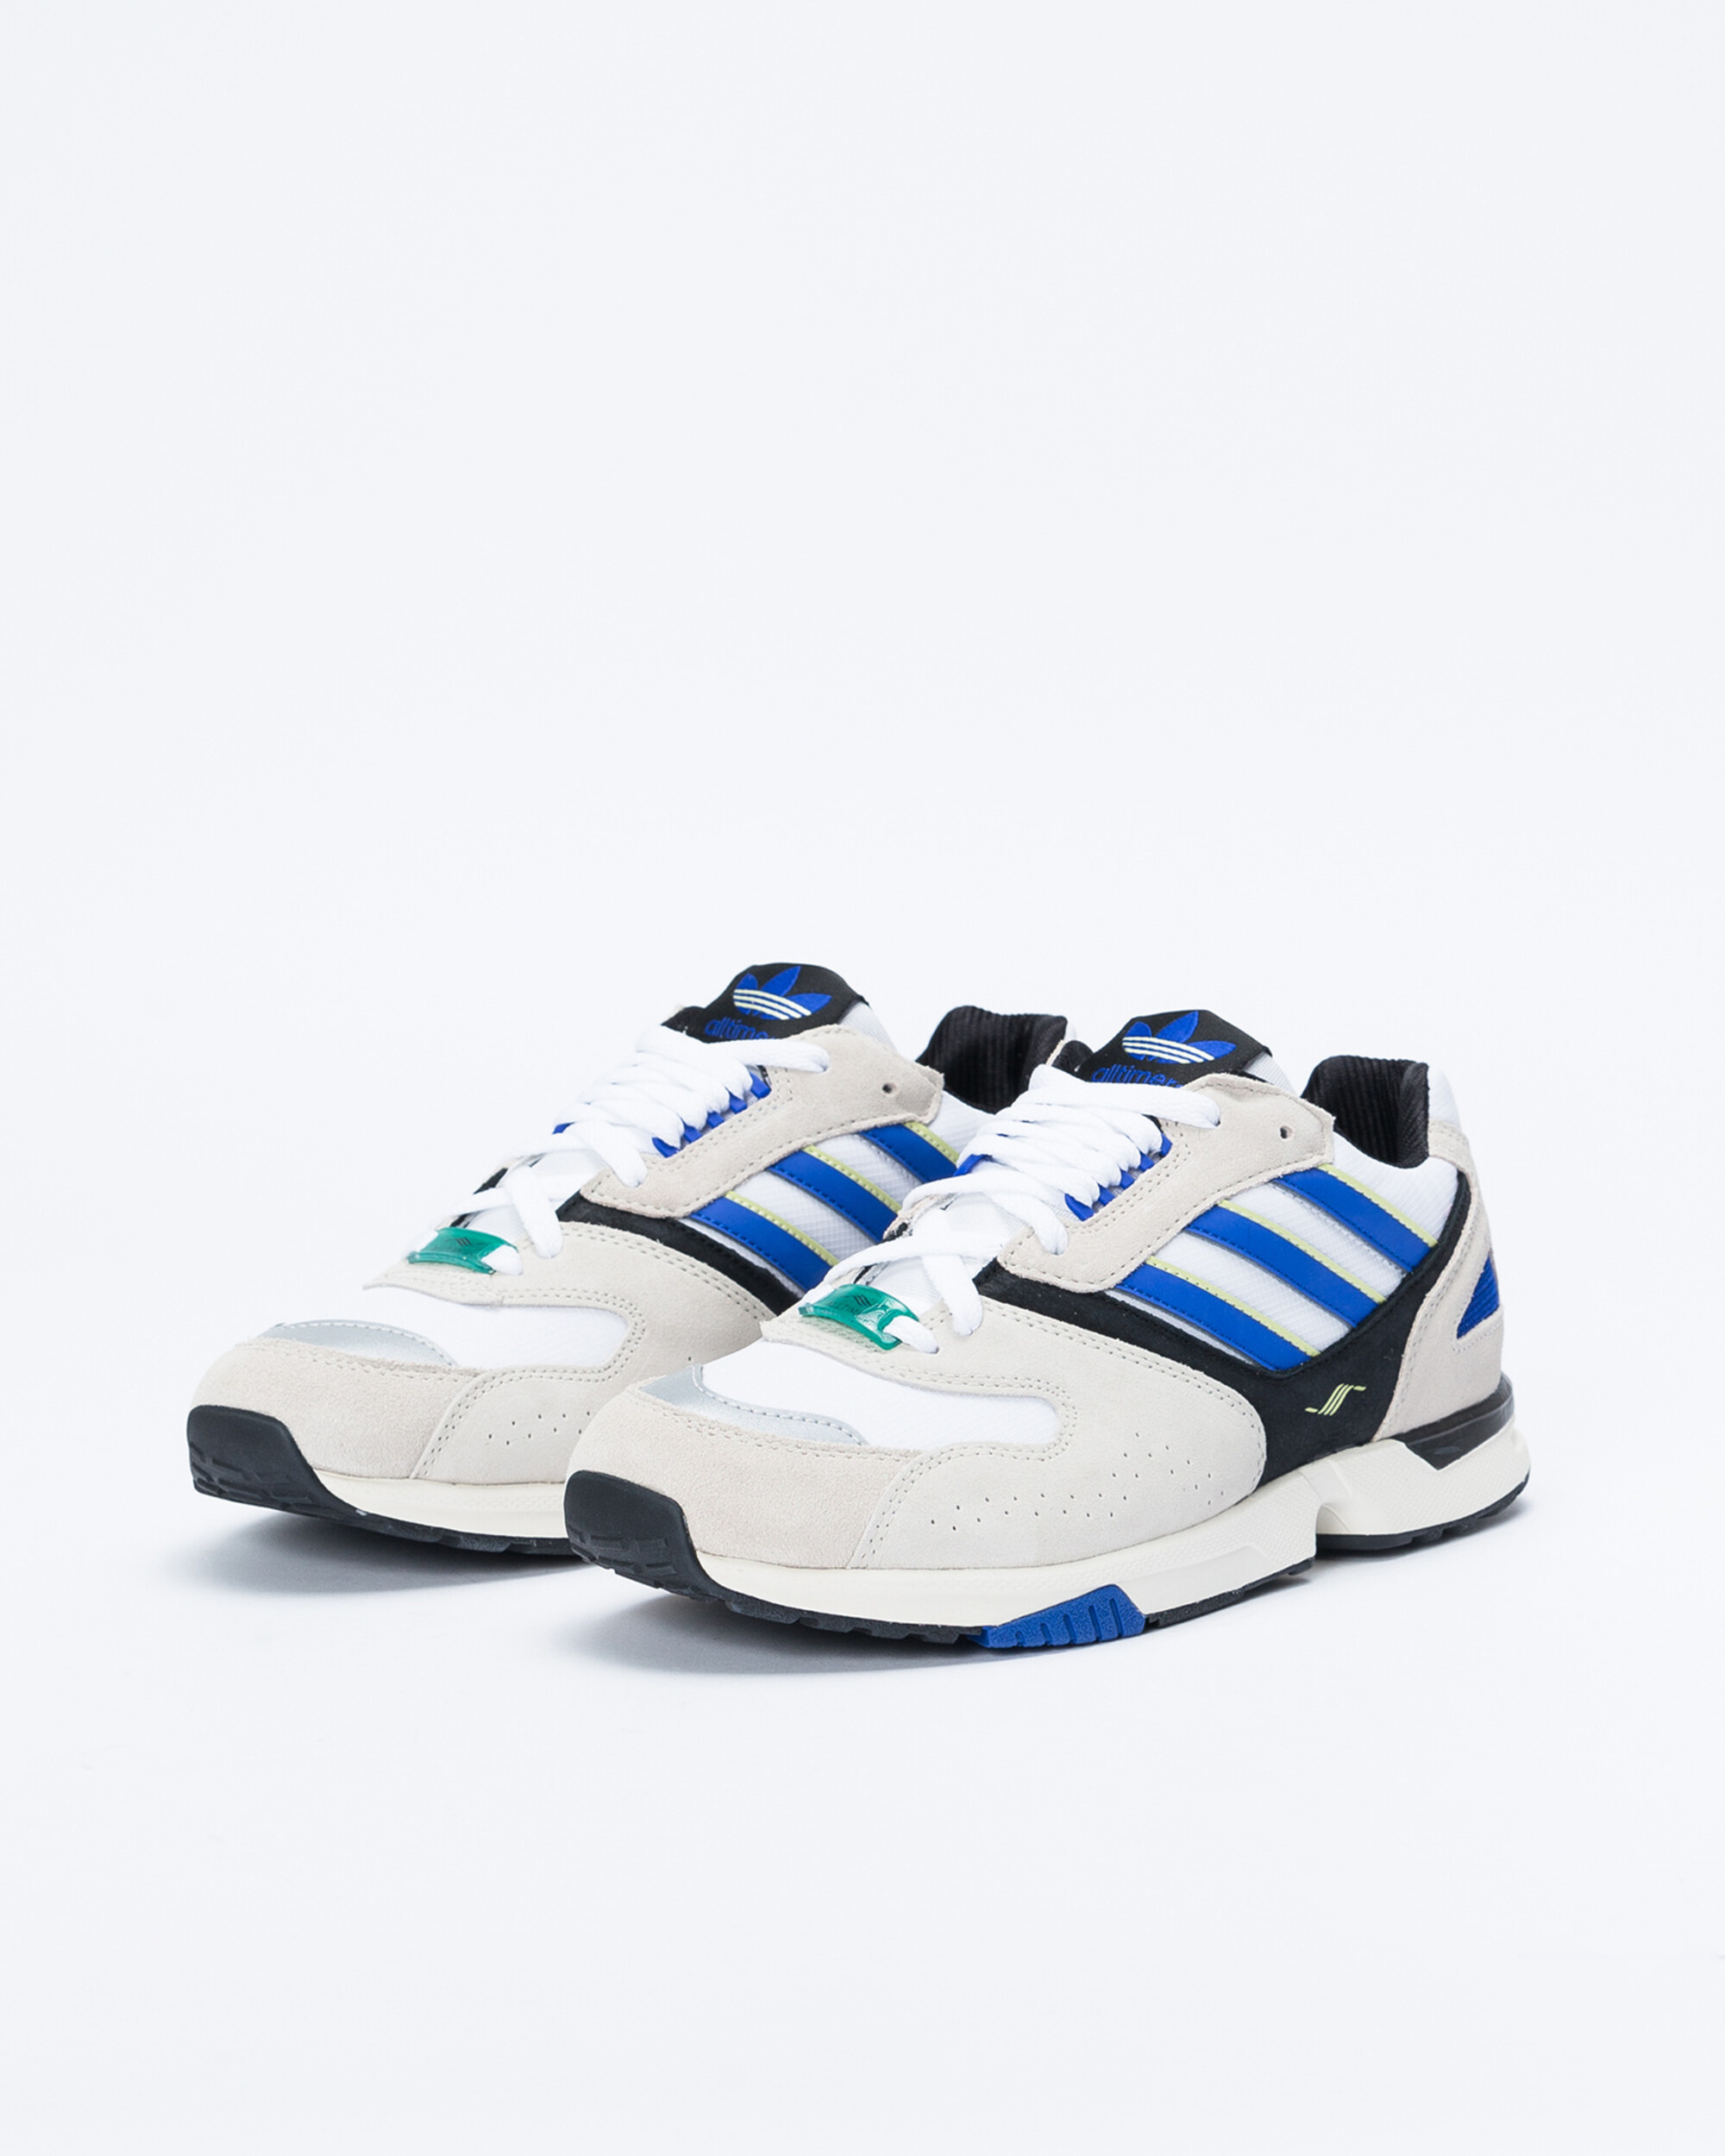 adidas x Alltimers ZX4000 Clear Brown/Core Black/Collegiate Royal